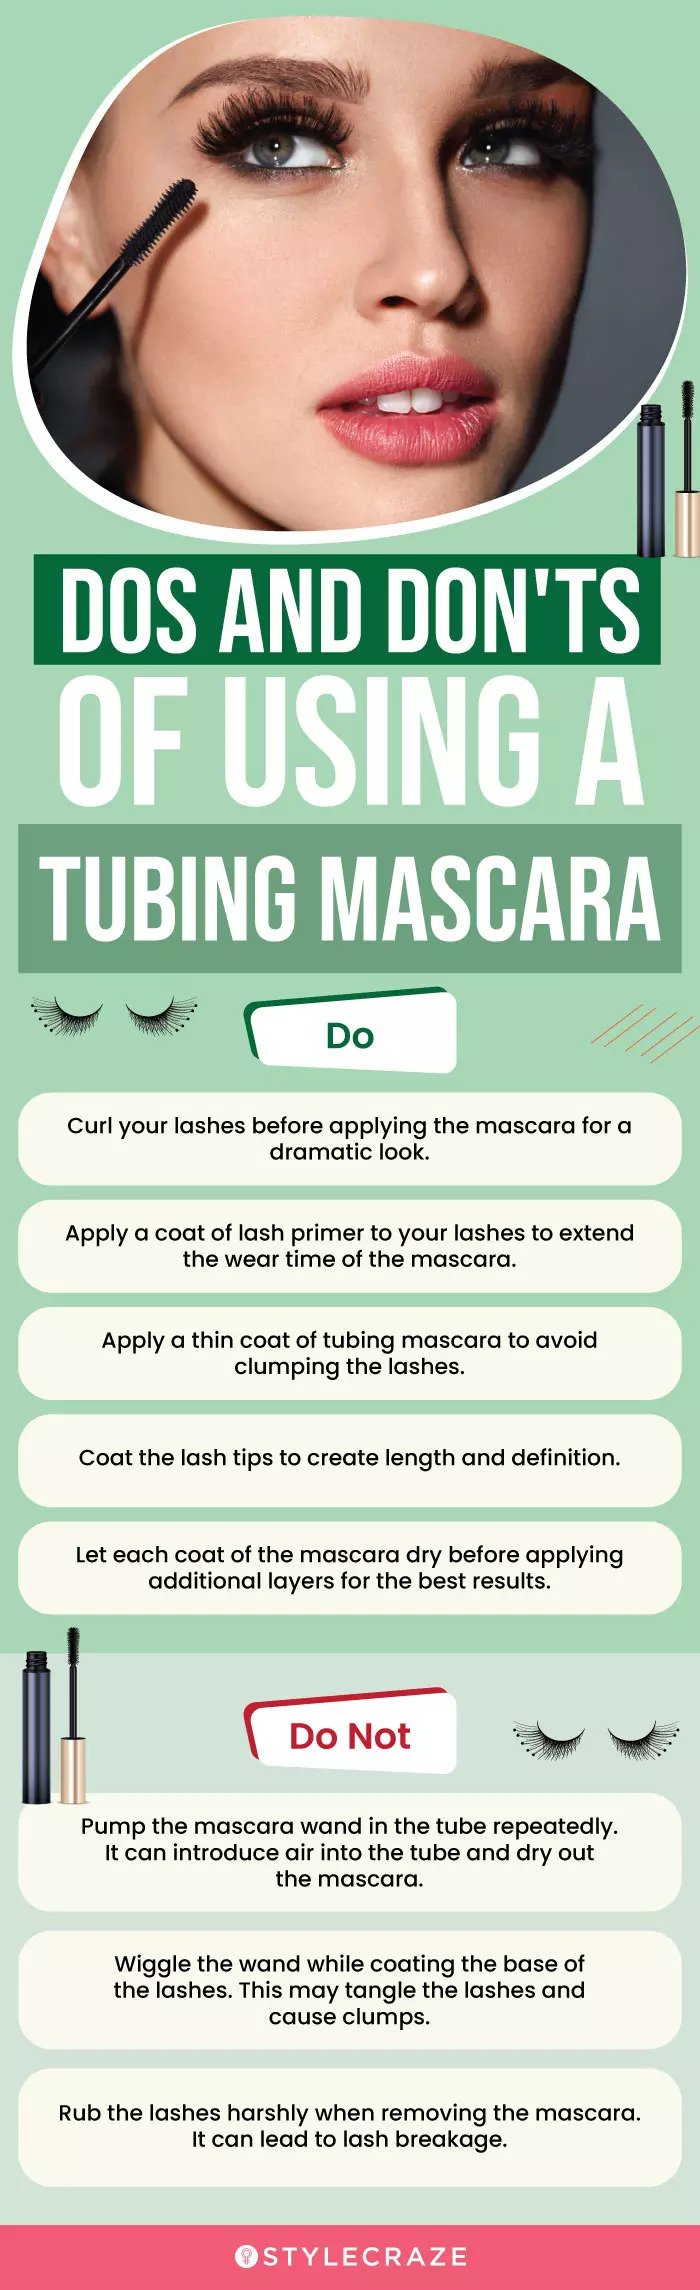 Dos and Don'ts Of Using A Tubing Mascara (infographic)